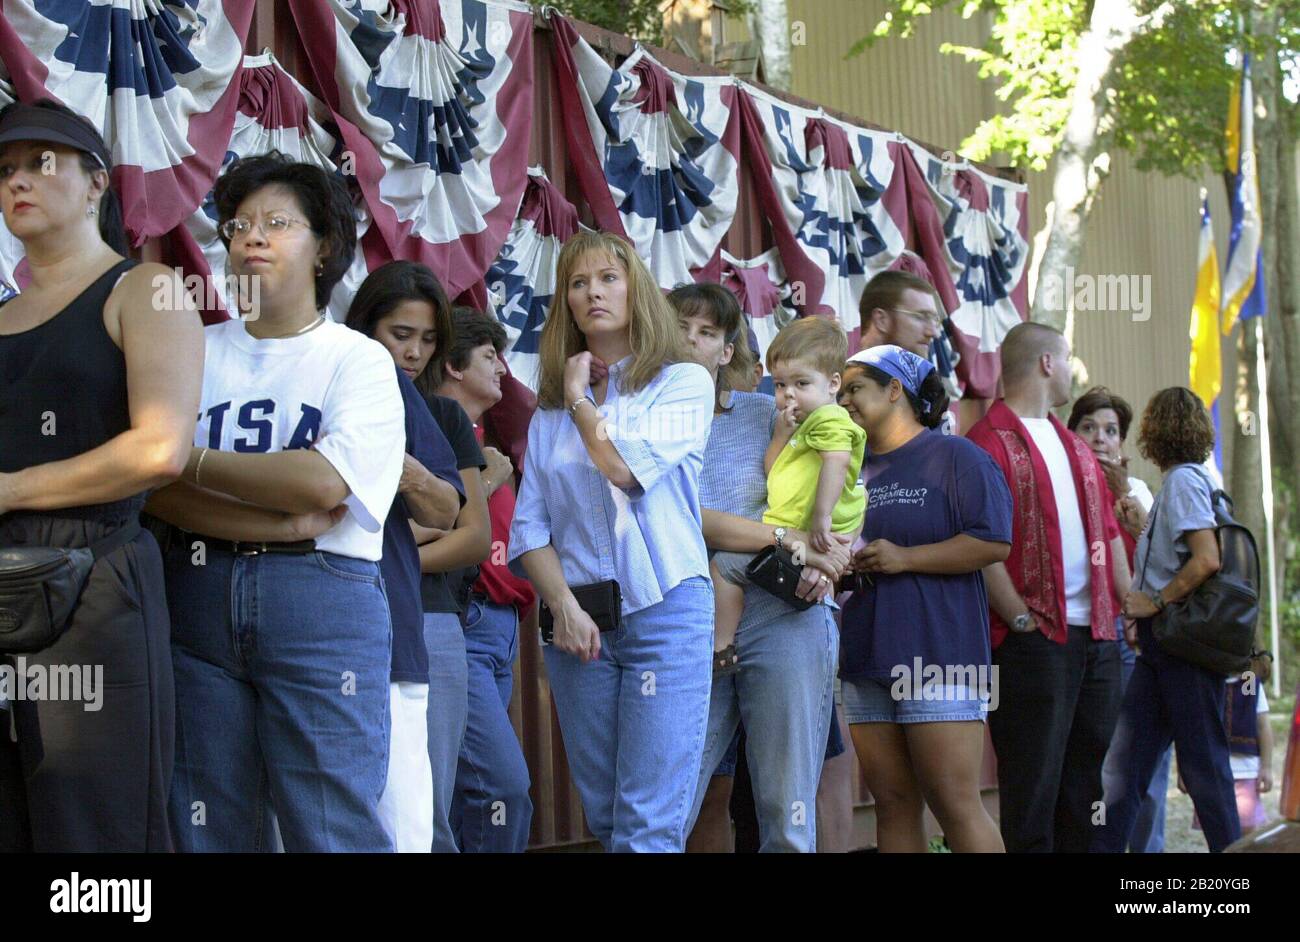 September 14, 2001, Austin, Texas: Customers wait in a long line at a small business in south Austin that specializes in flag sales. Stores were swamped with customers looking for symbols of patriotism following the terrorist attacks on the World Trade Center and Pentagon on Sept. 11. ©Bob Daemmrich Stock Photo